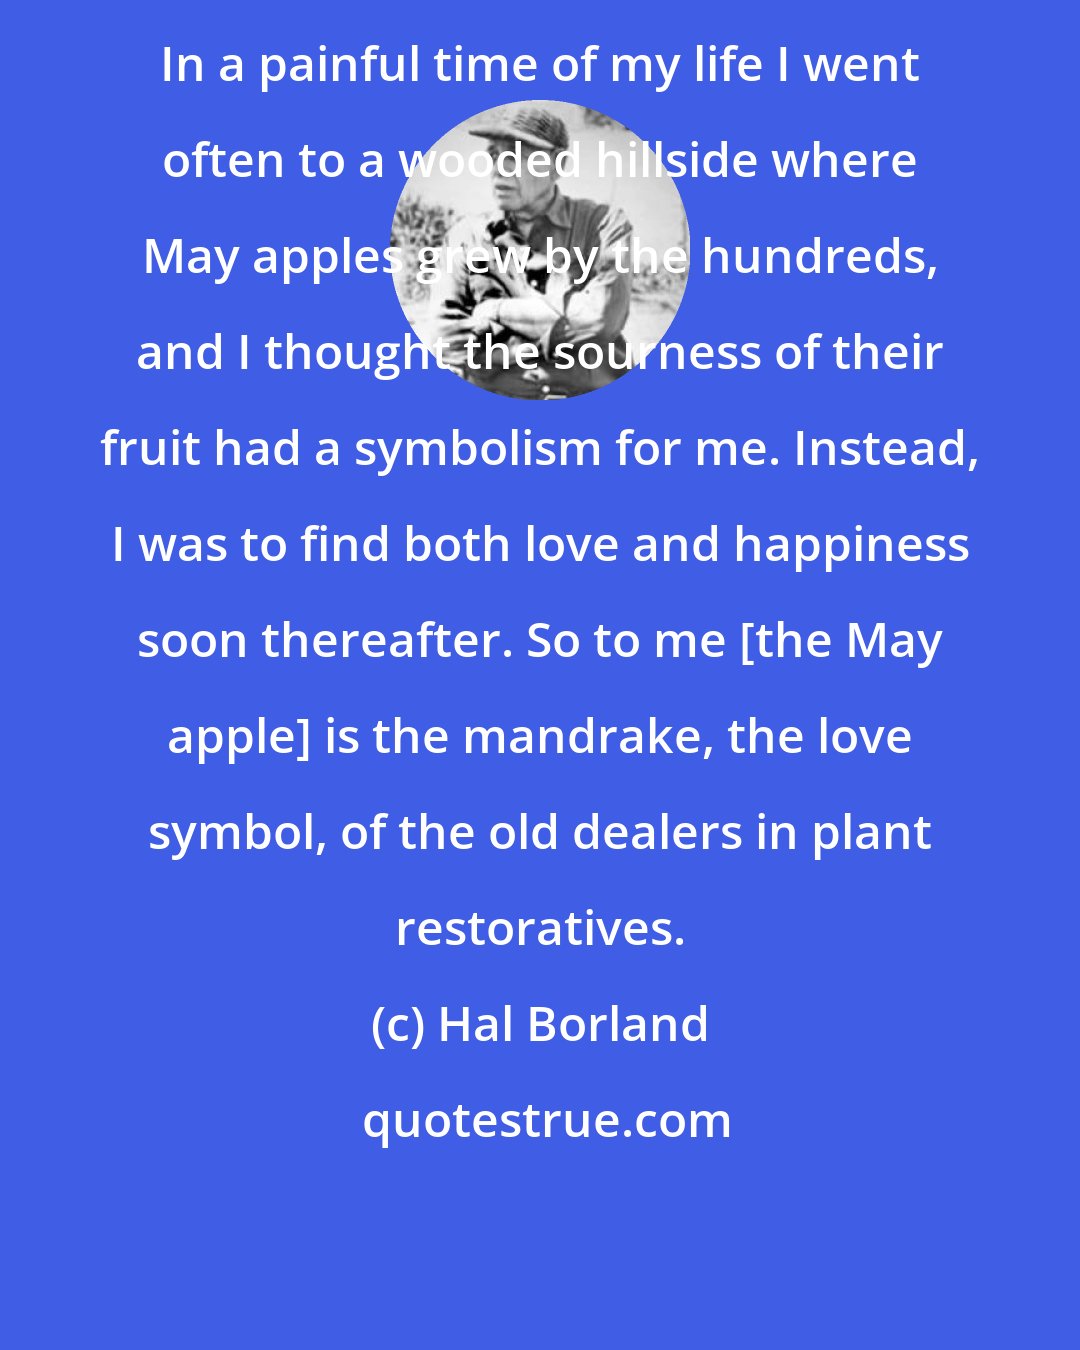 Hal Borland: In a painful time of my life I went often to a wooded hillside where May apples grew by the hundreds, and I thought the sourness of their fruit had a symbolism for me. Instead, I was to find both love and happiness soon thereafter. So to me [the May apple] is the mandrake, the love symbol, of the old dealers in plant restoratives.